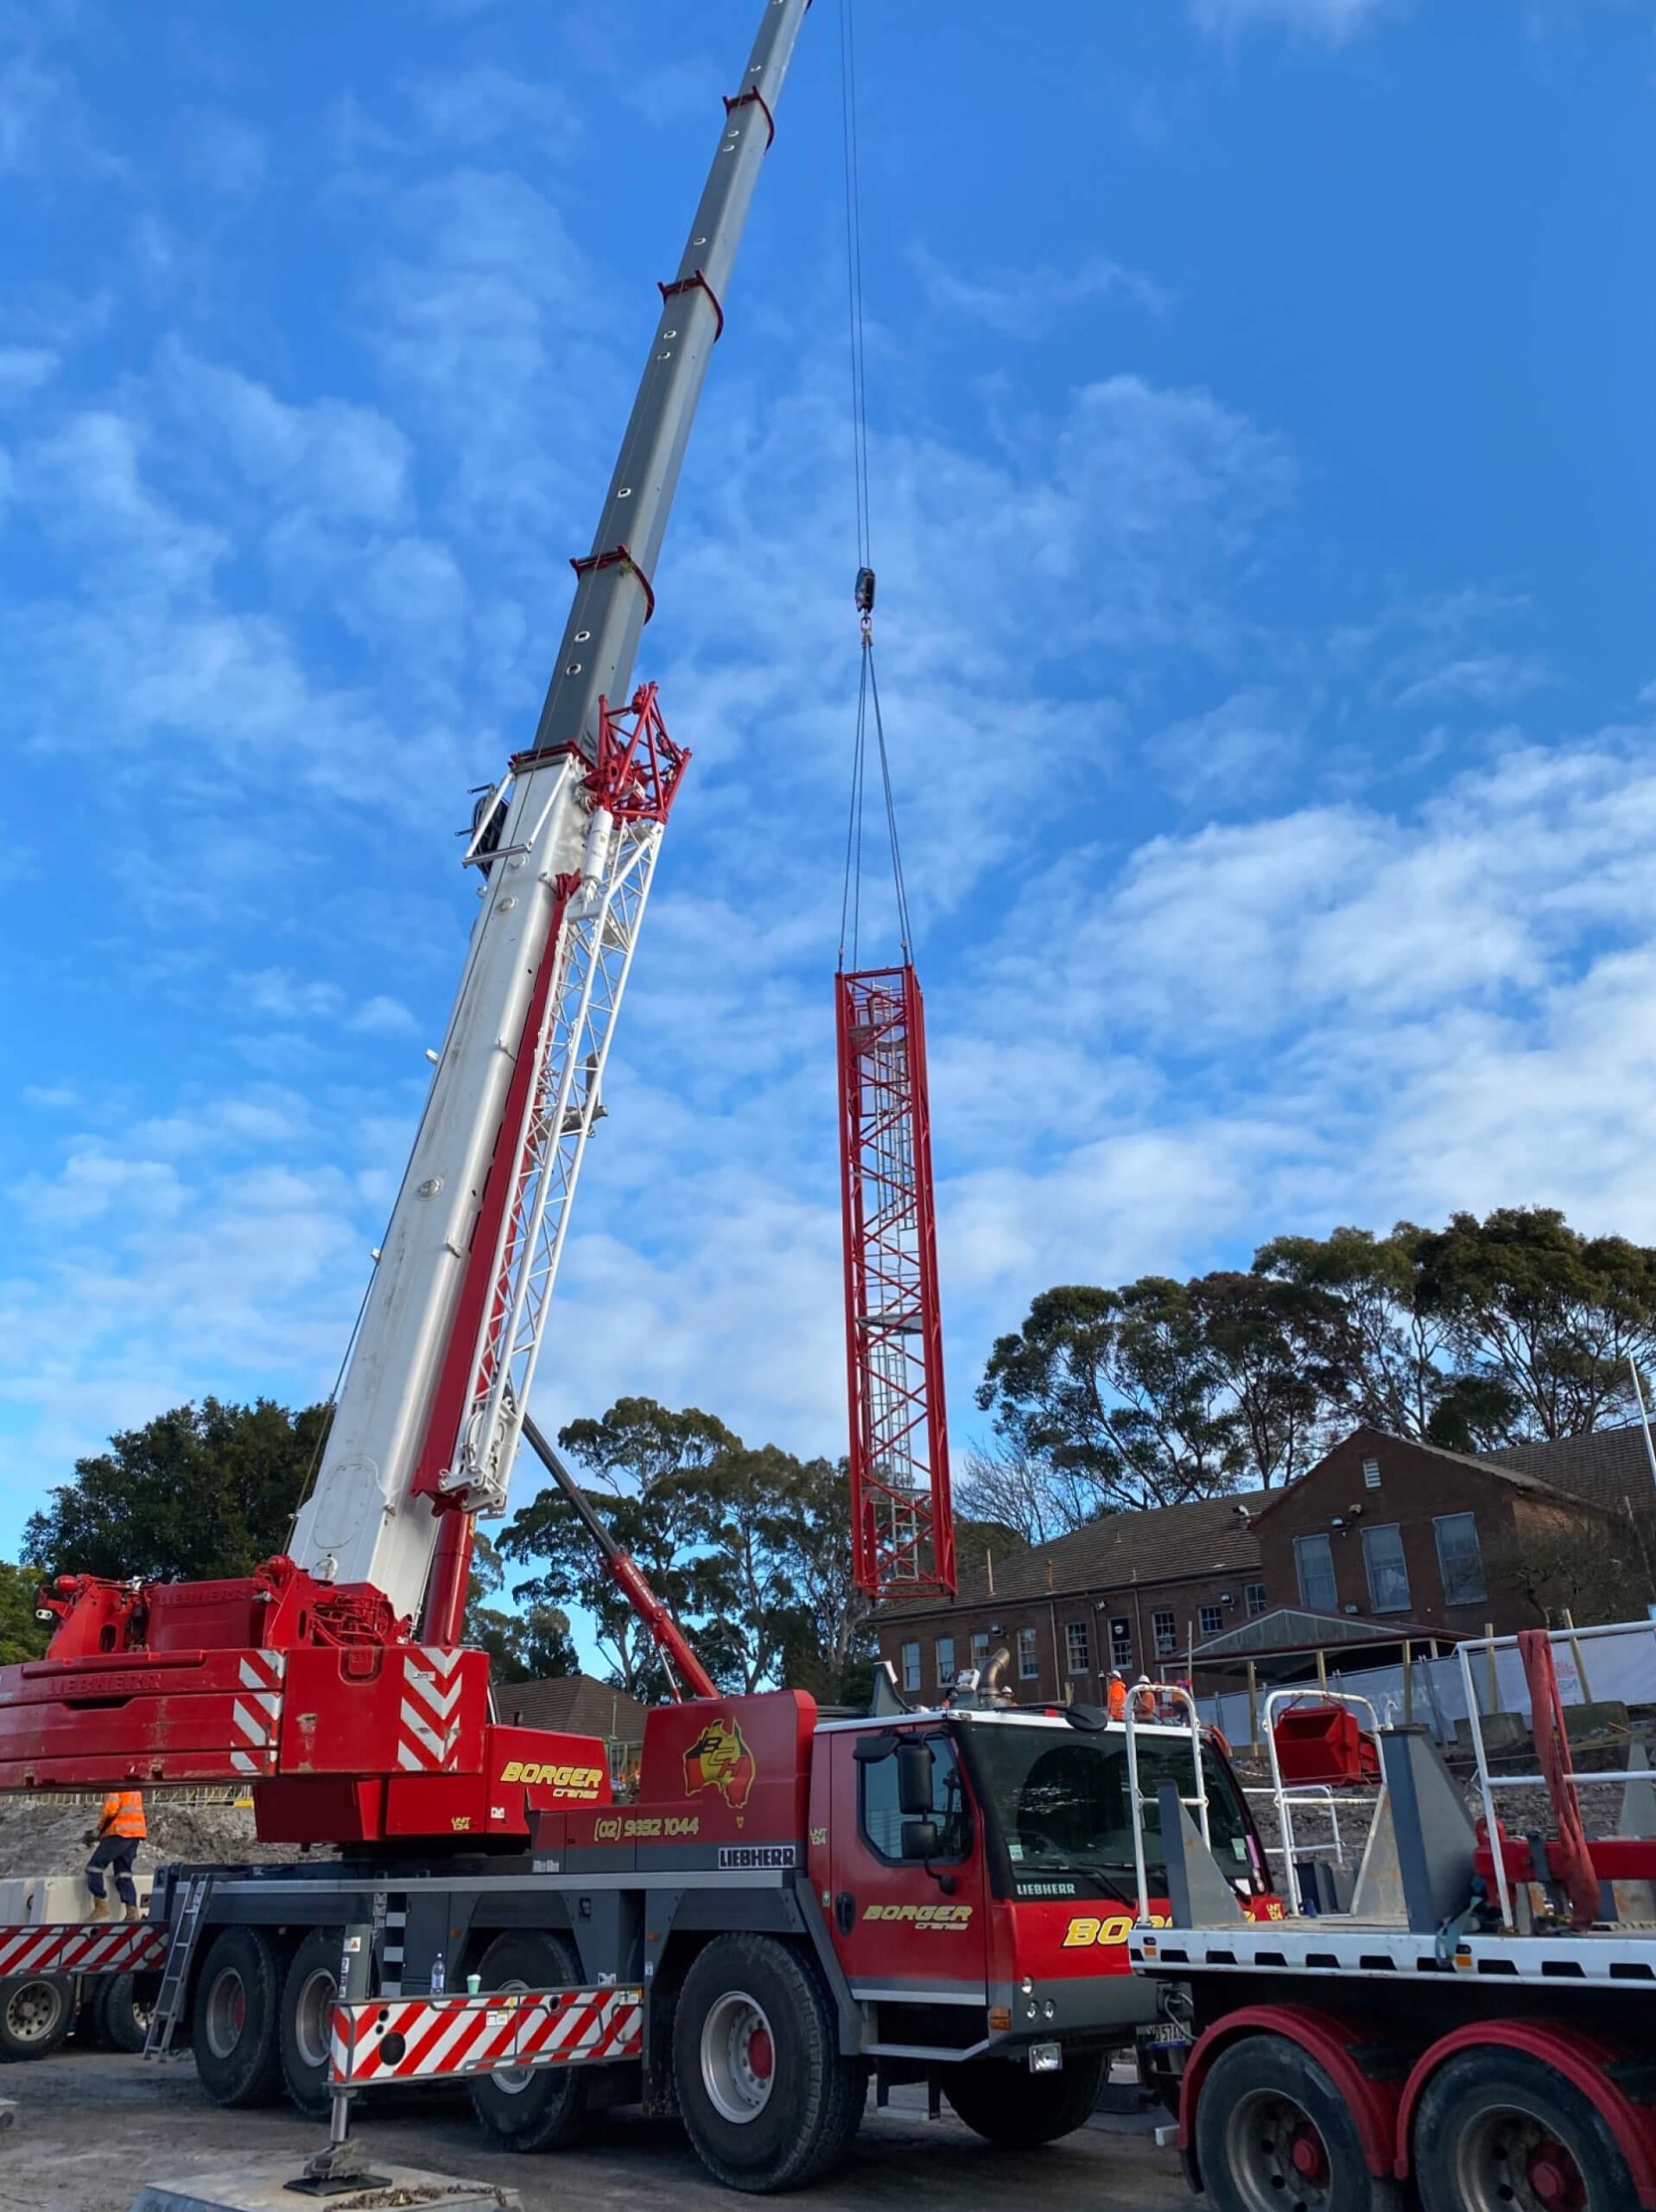 005 candy crane being lifted into place by truck onsite taylor 2